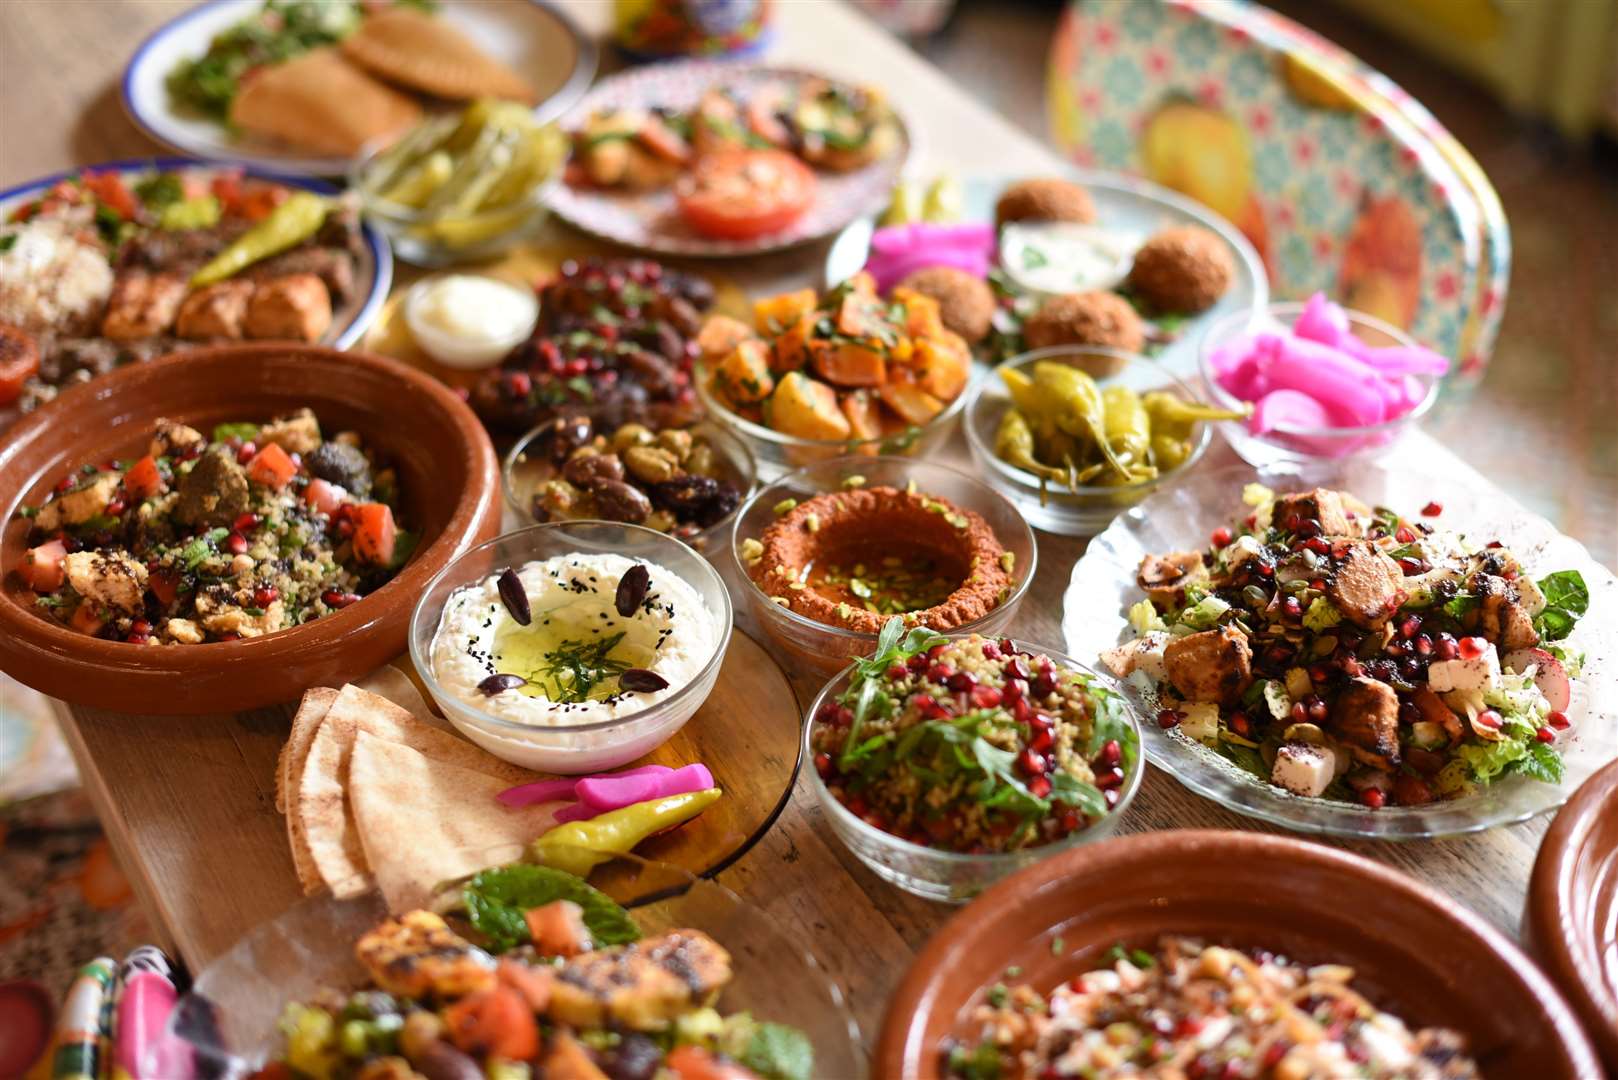 A variety of Middle Eastern foods will be on offer when Comptoir Libanais opens in Autumn (13216649)